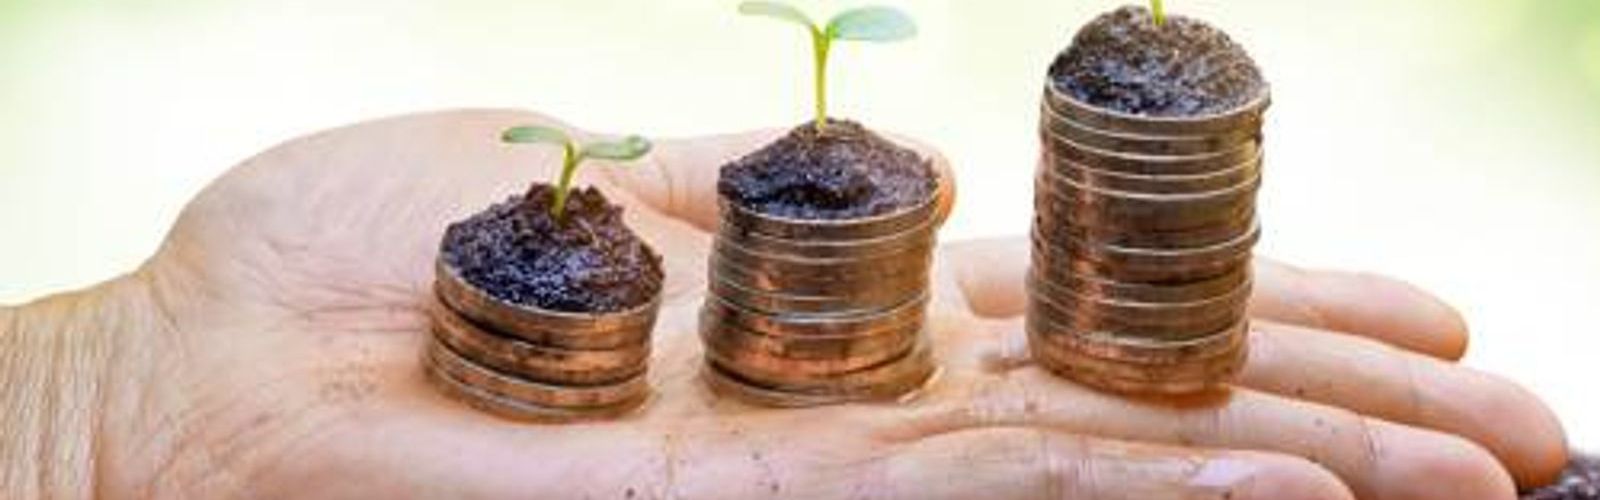 hand with stacks of money growing_220473742_web_small_NOL.jpg